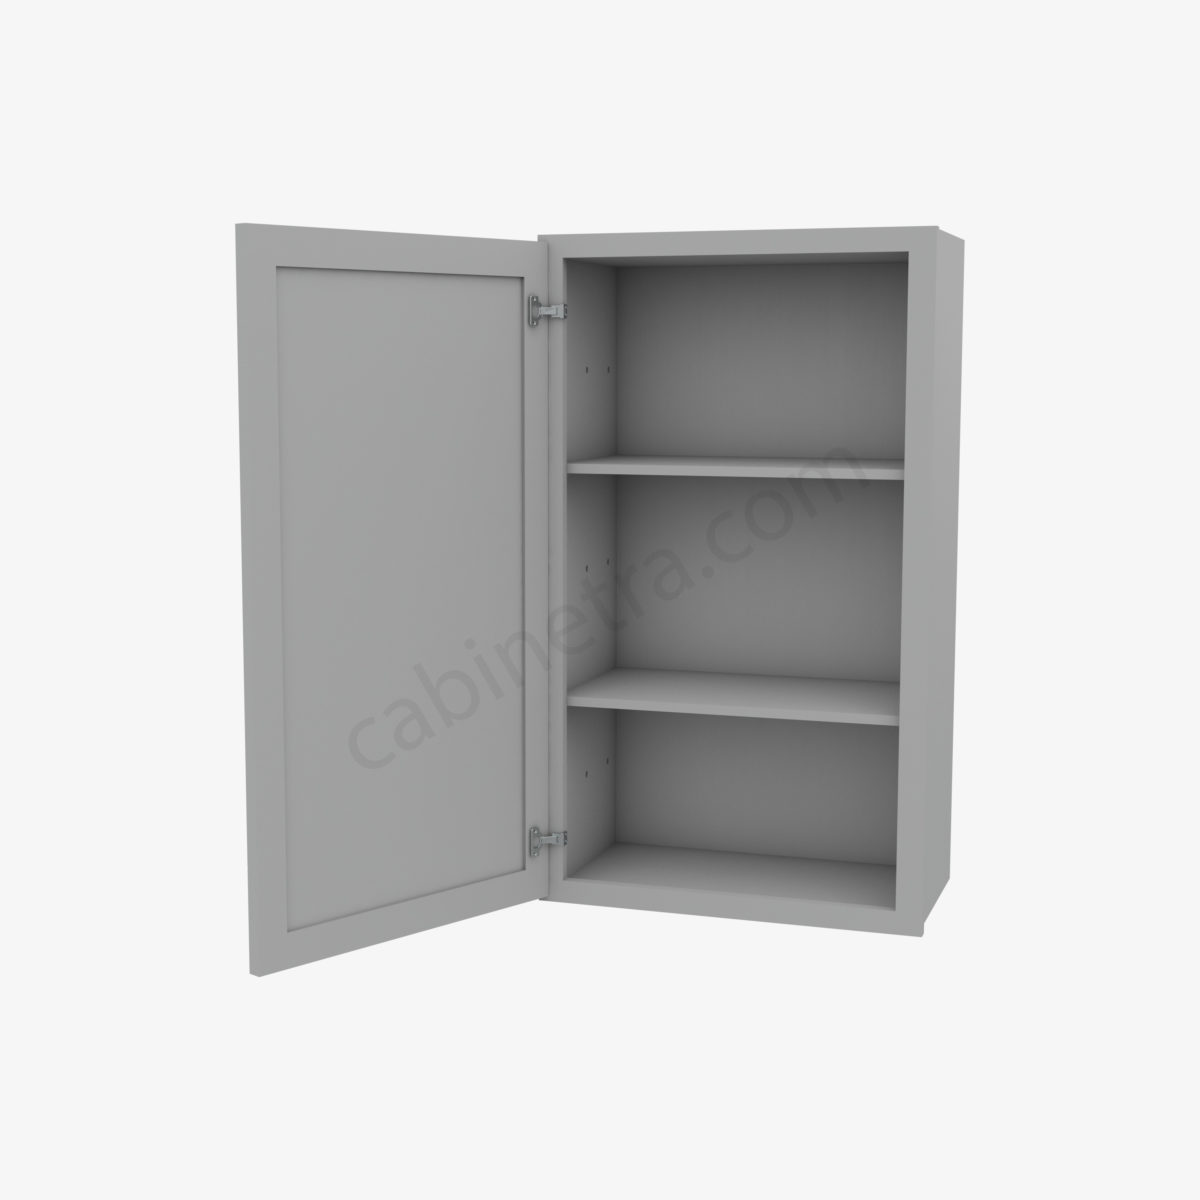 AB W2136 5 Forevermark Lait Gray Shaker Cabinetra scaled